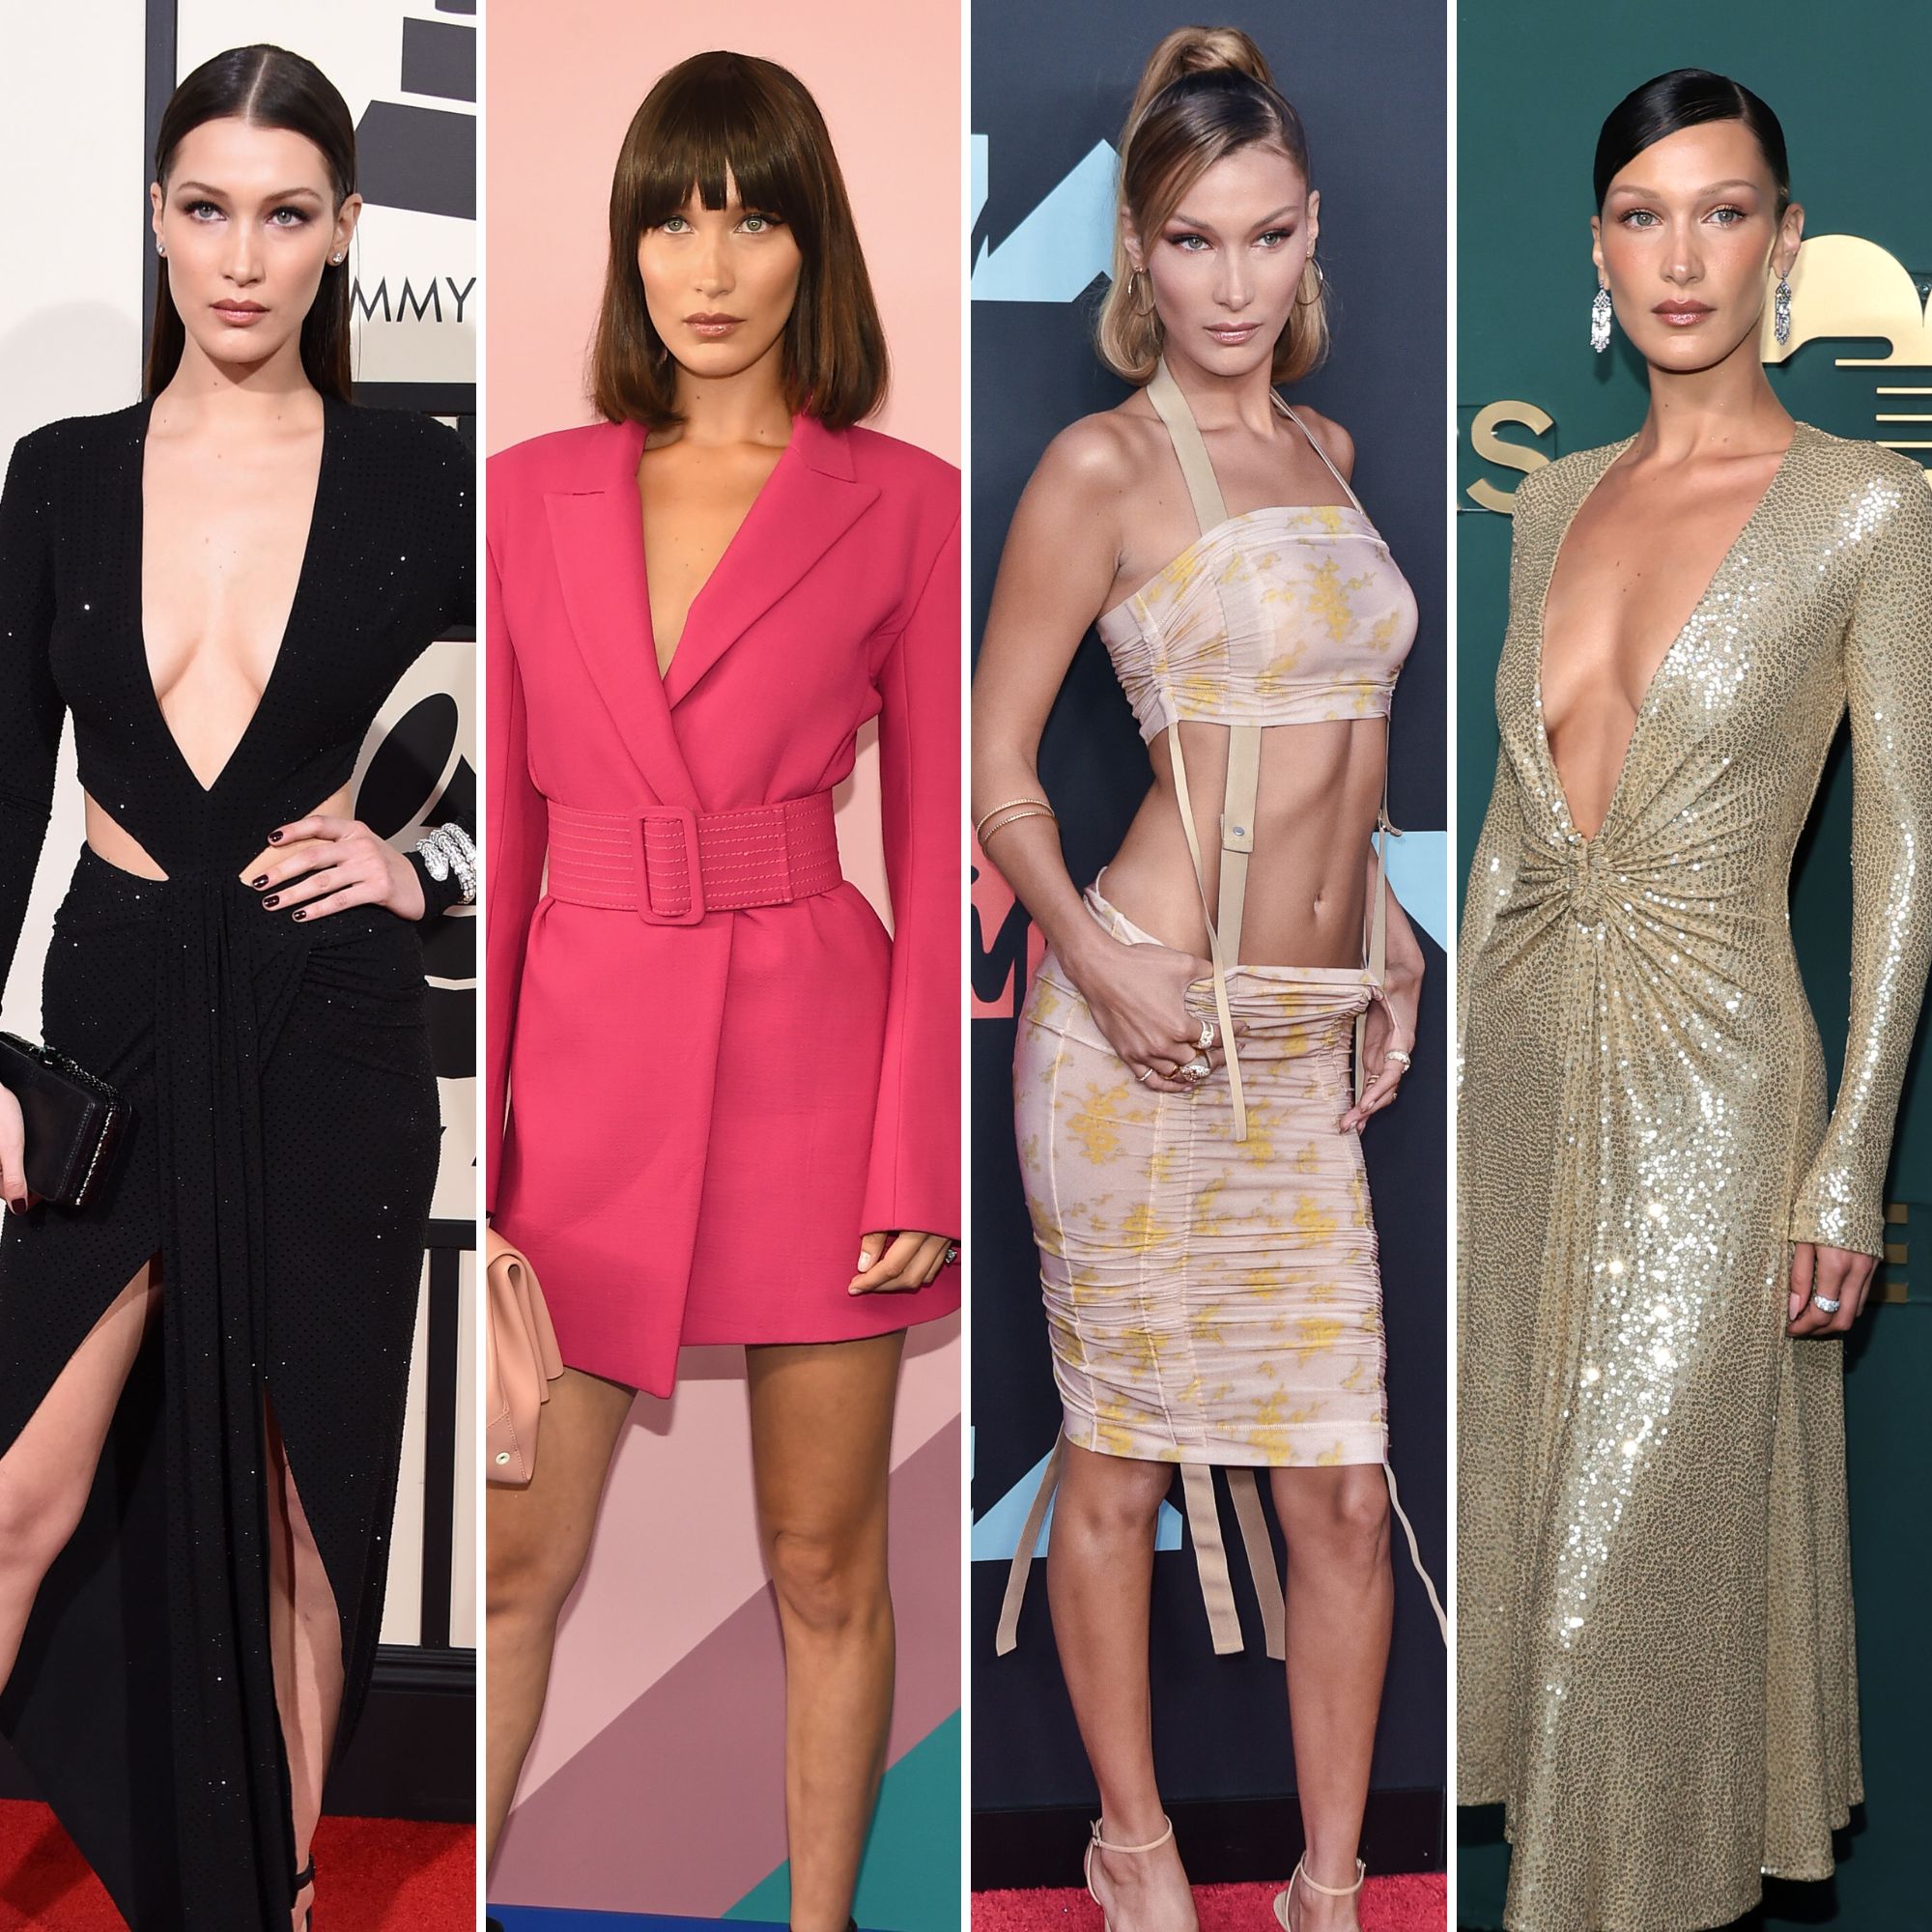 Bella Hadid Breaks Down 15 Looks From 2015 to Now